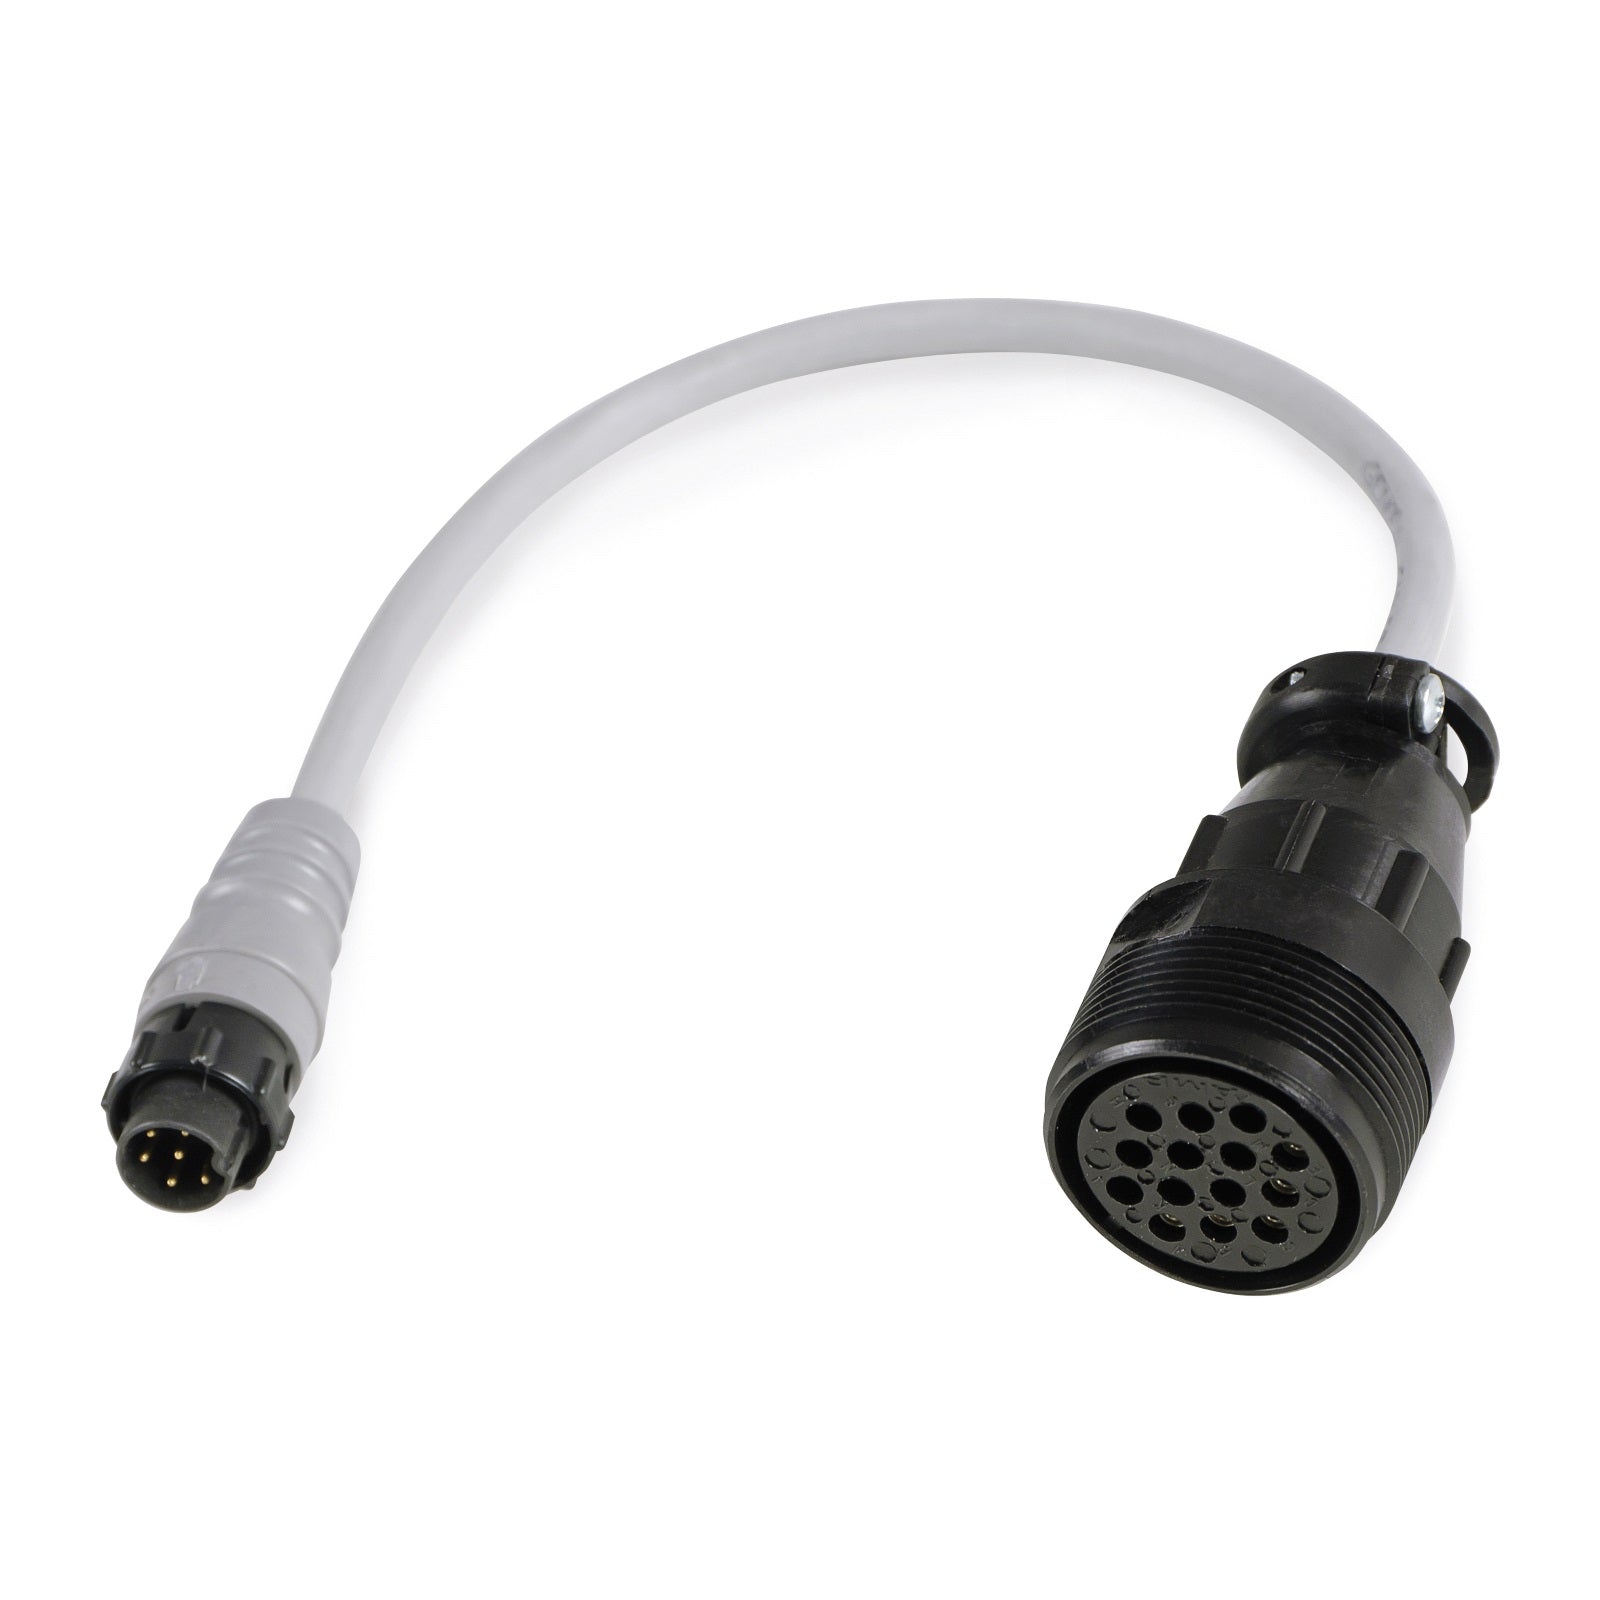 Miller 14-Pin to 6-Pin Adapter Cord (300507)